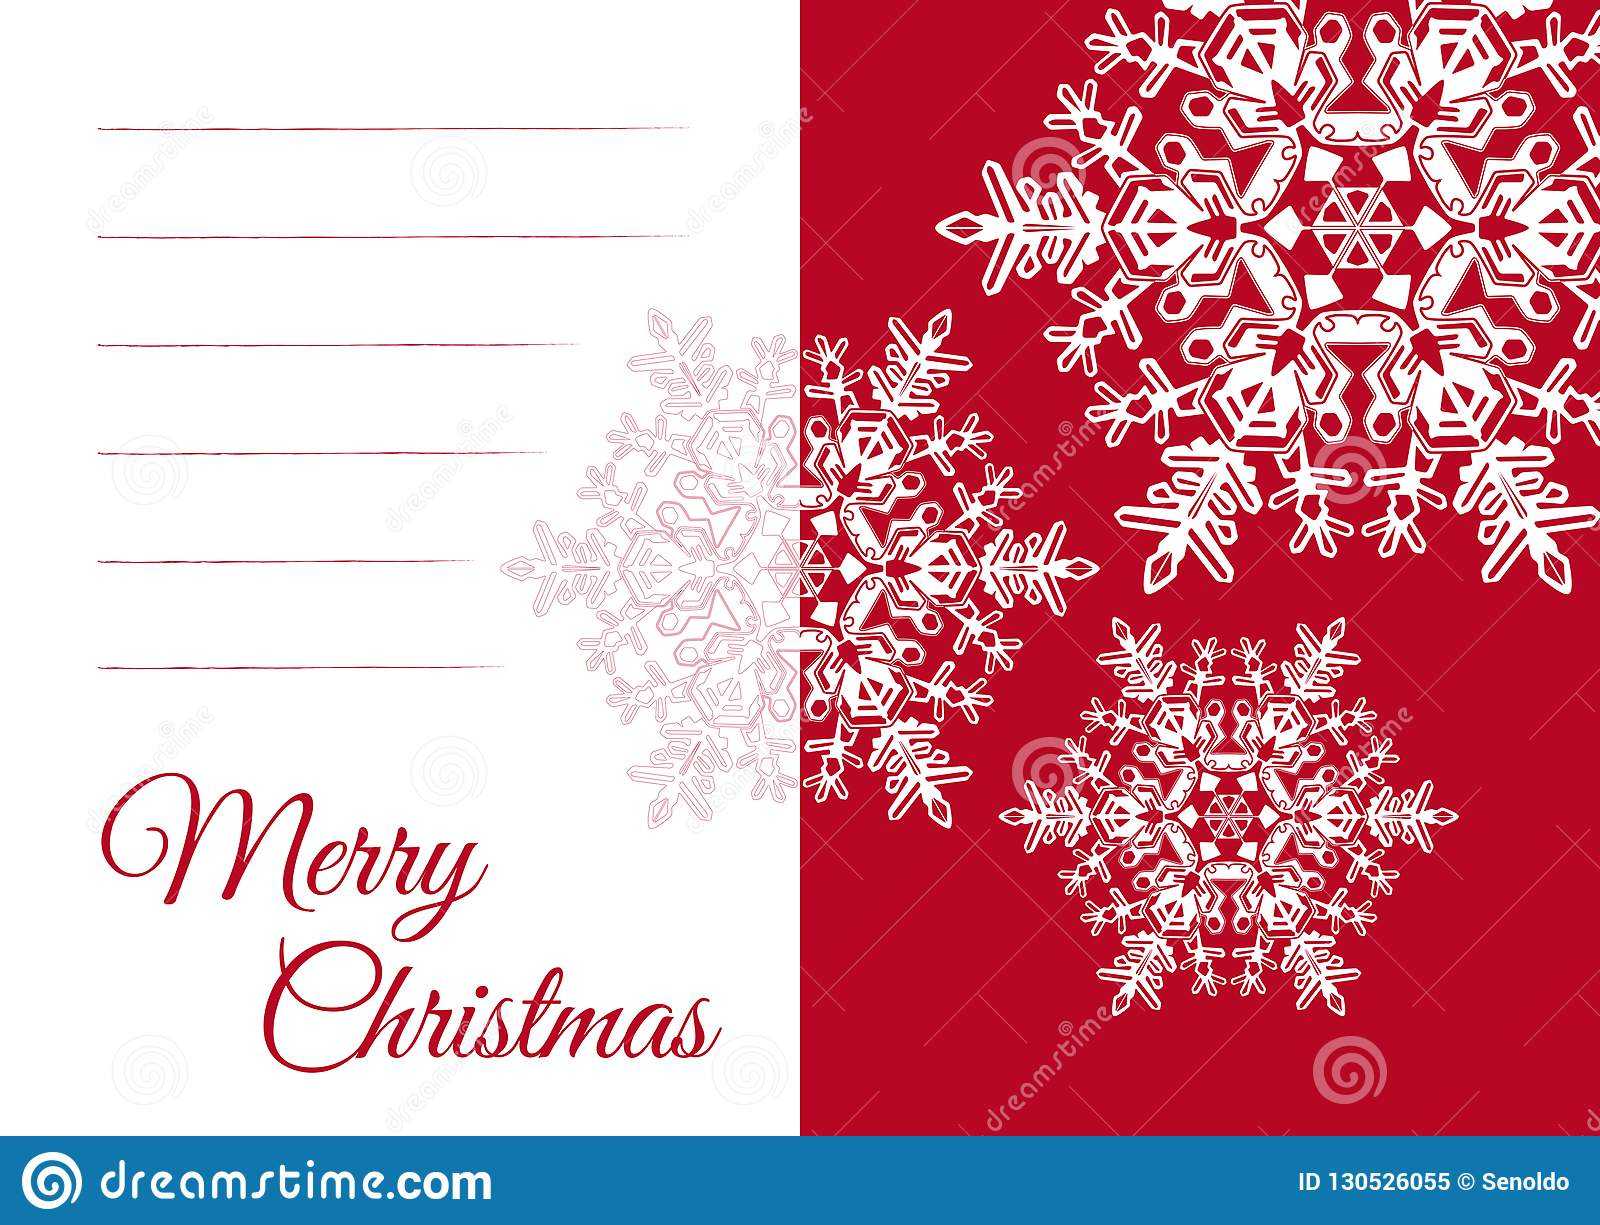 Christmas Greeting Card Template With Blank Text Field Stock Within Free Printable Blank Greeting Card Templates